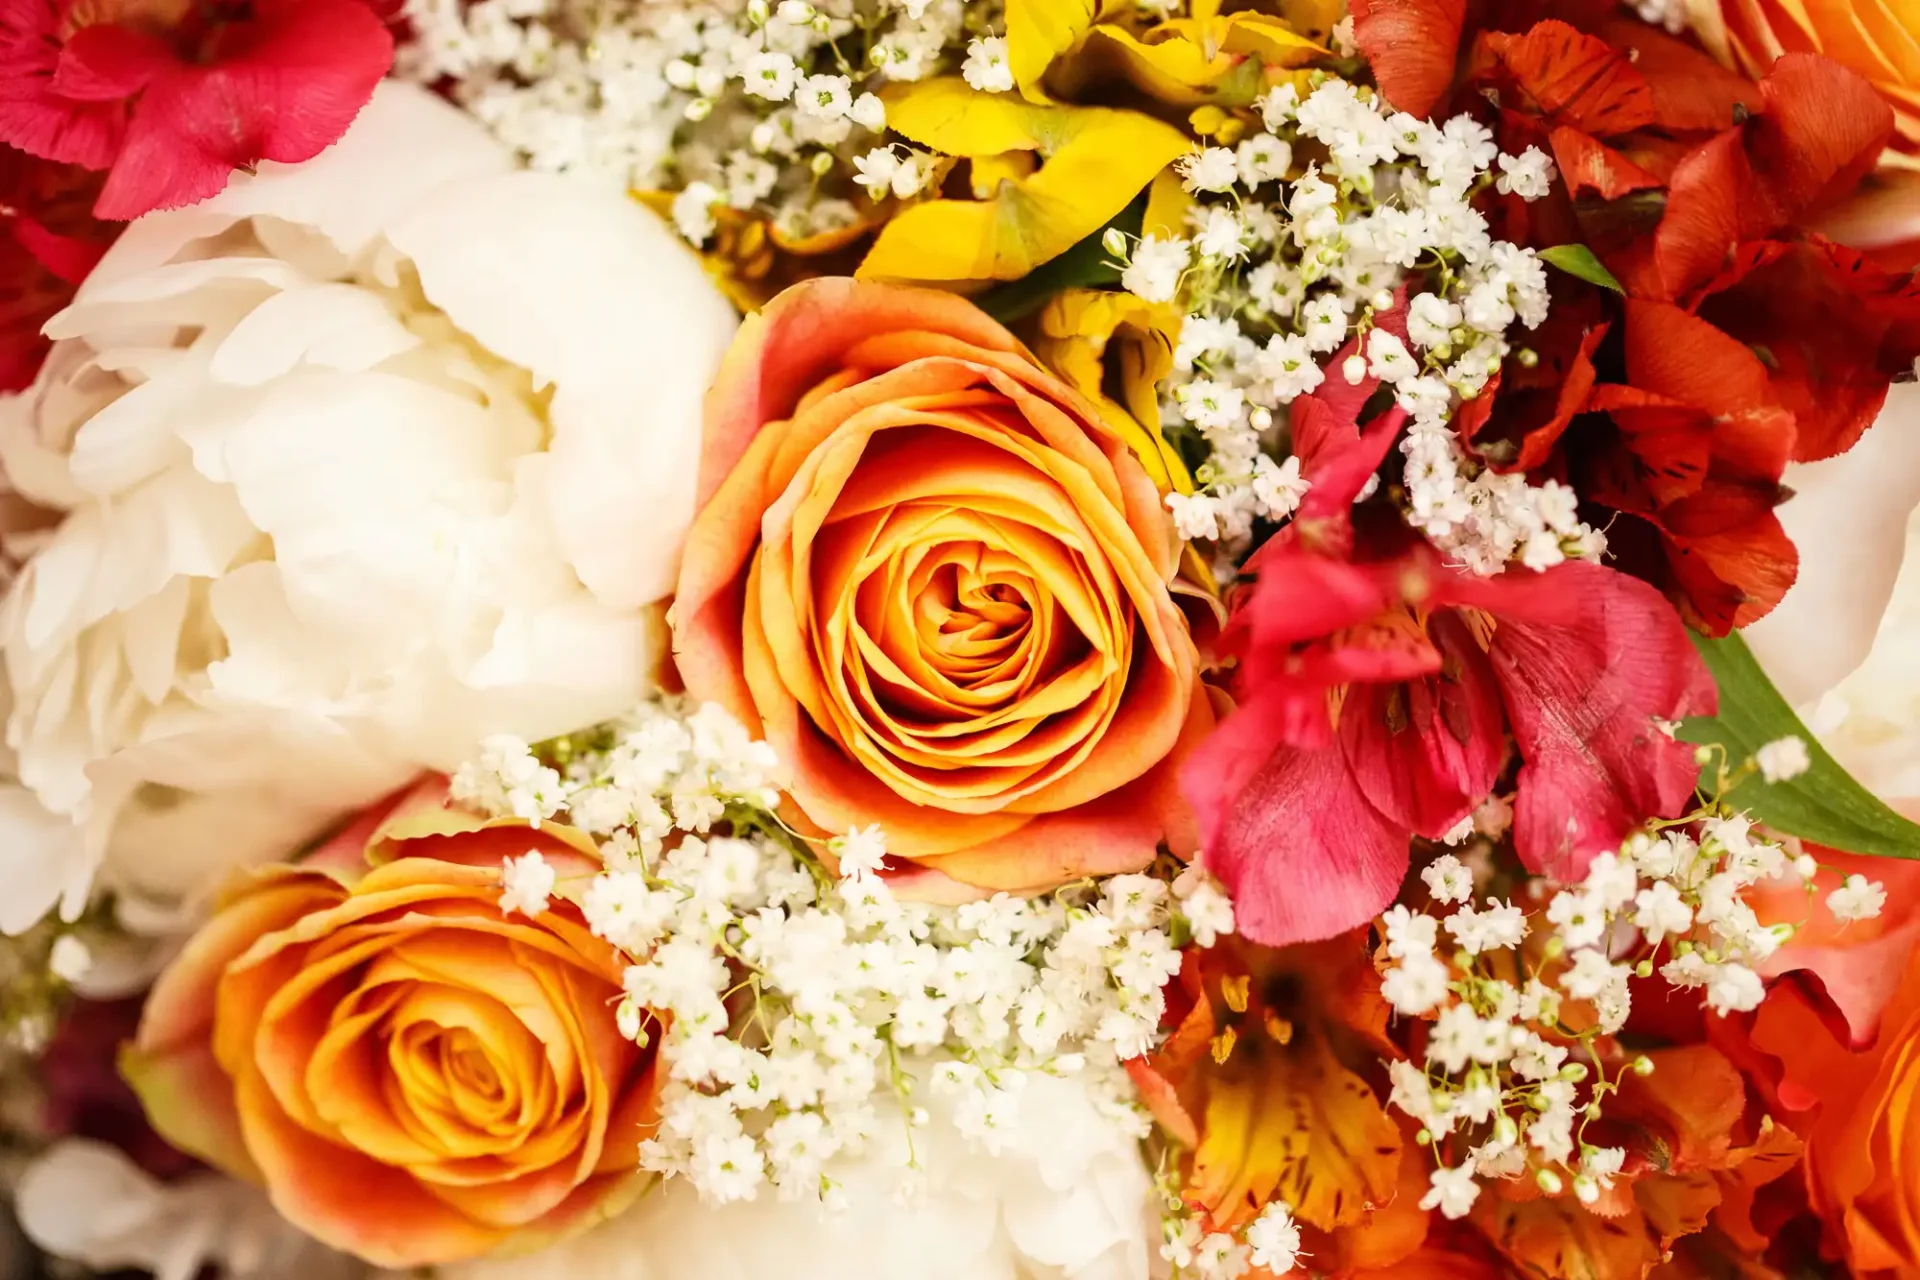 Close-up of a vibrant bouquet featuring orange roses, white peonies, red flowers, and delicate baby's breath.